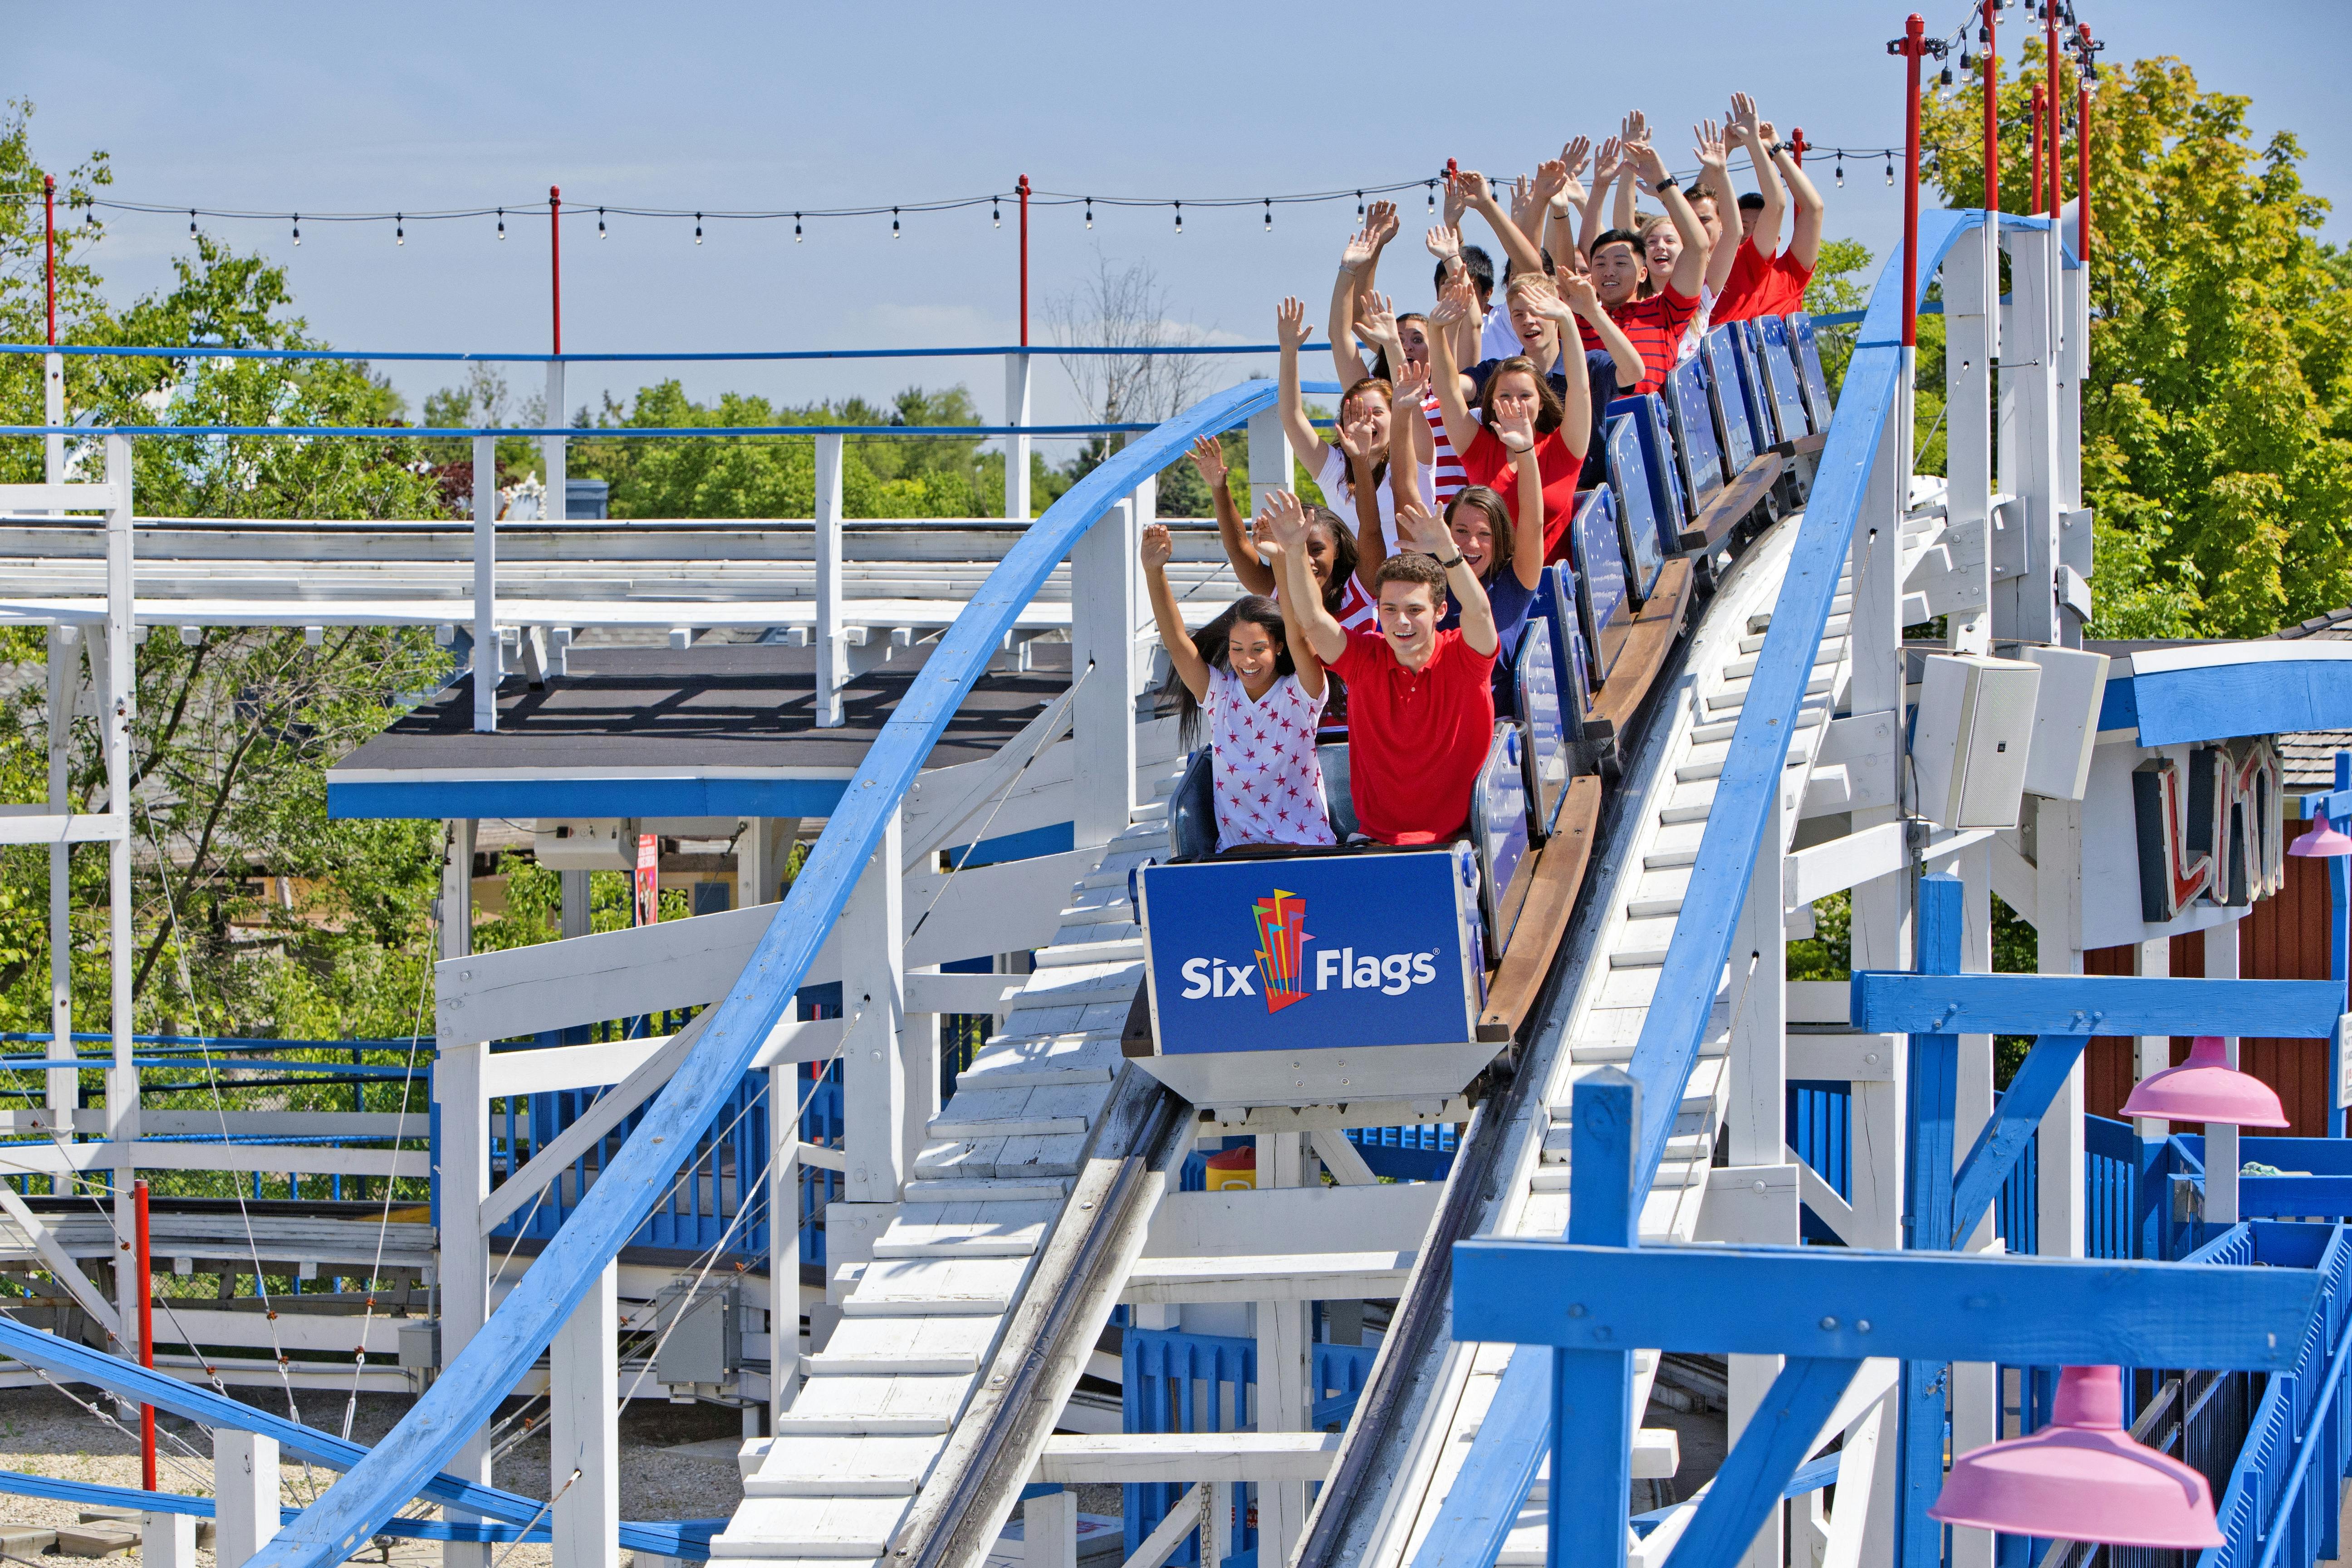 Six Flags Great America admission tickets